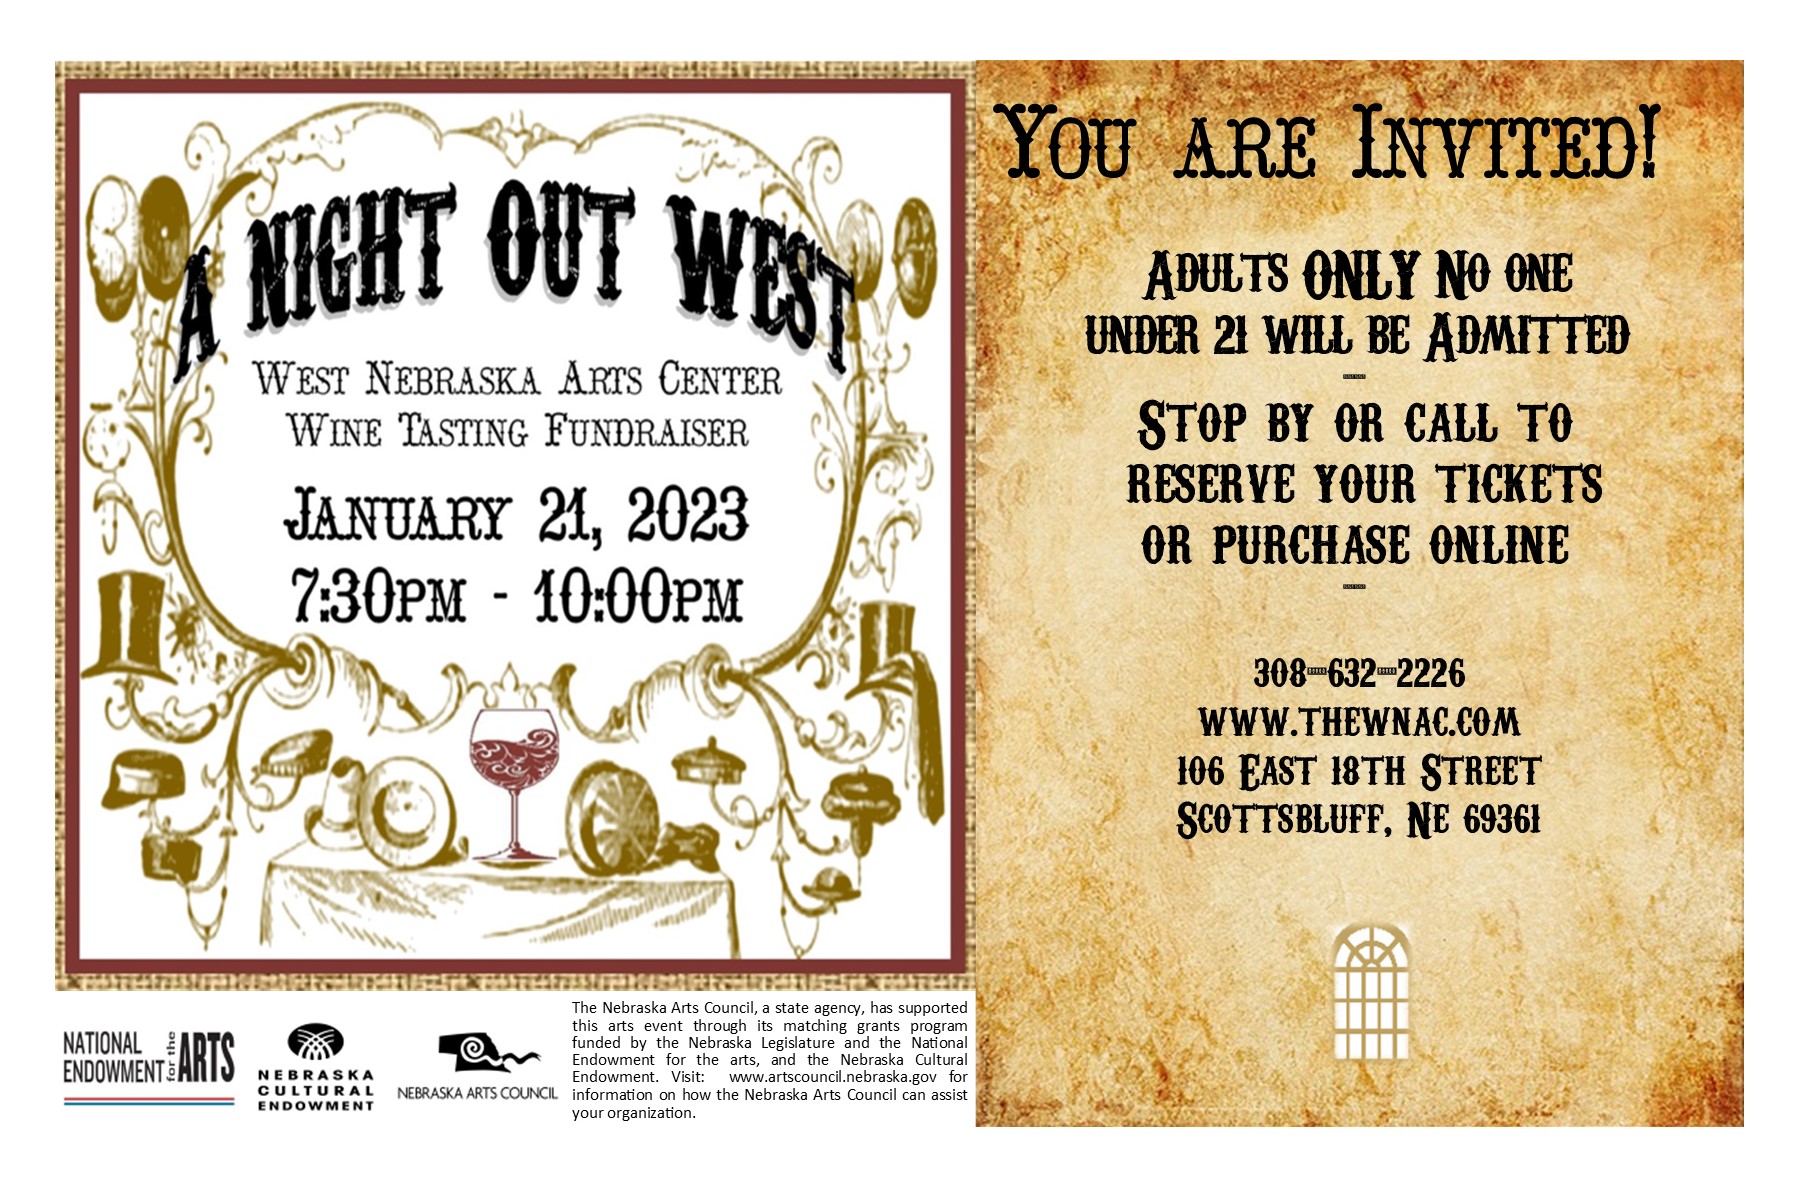 Event Promo Photo For A Night Out West Wine Tasting Fundraiser